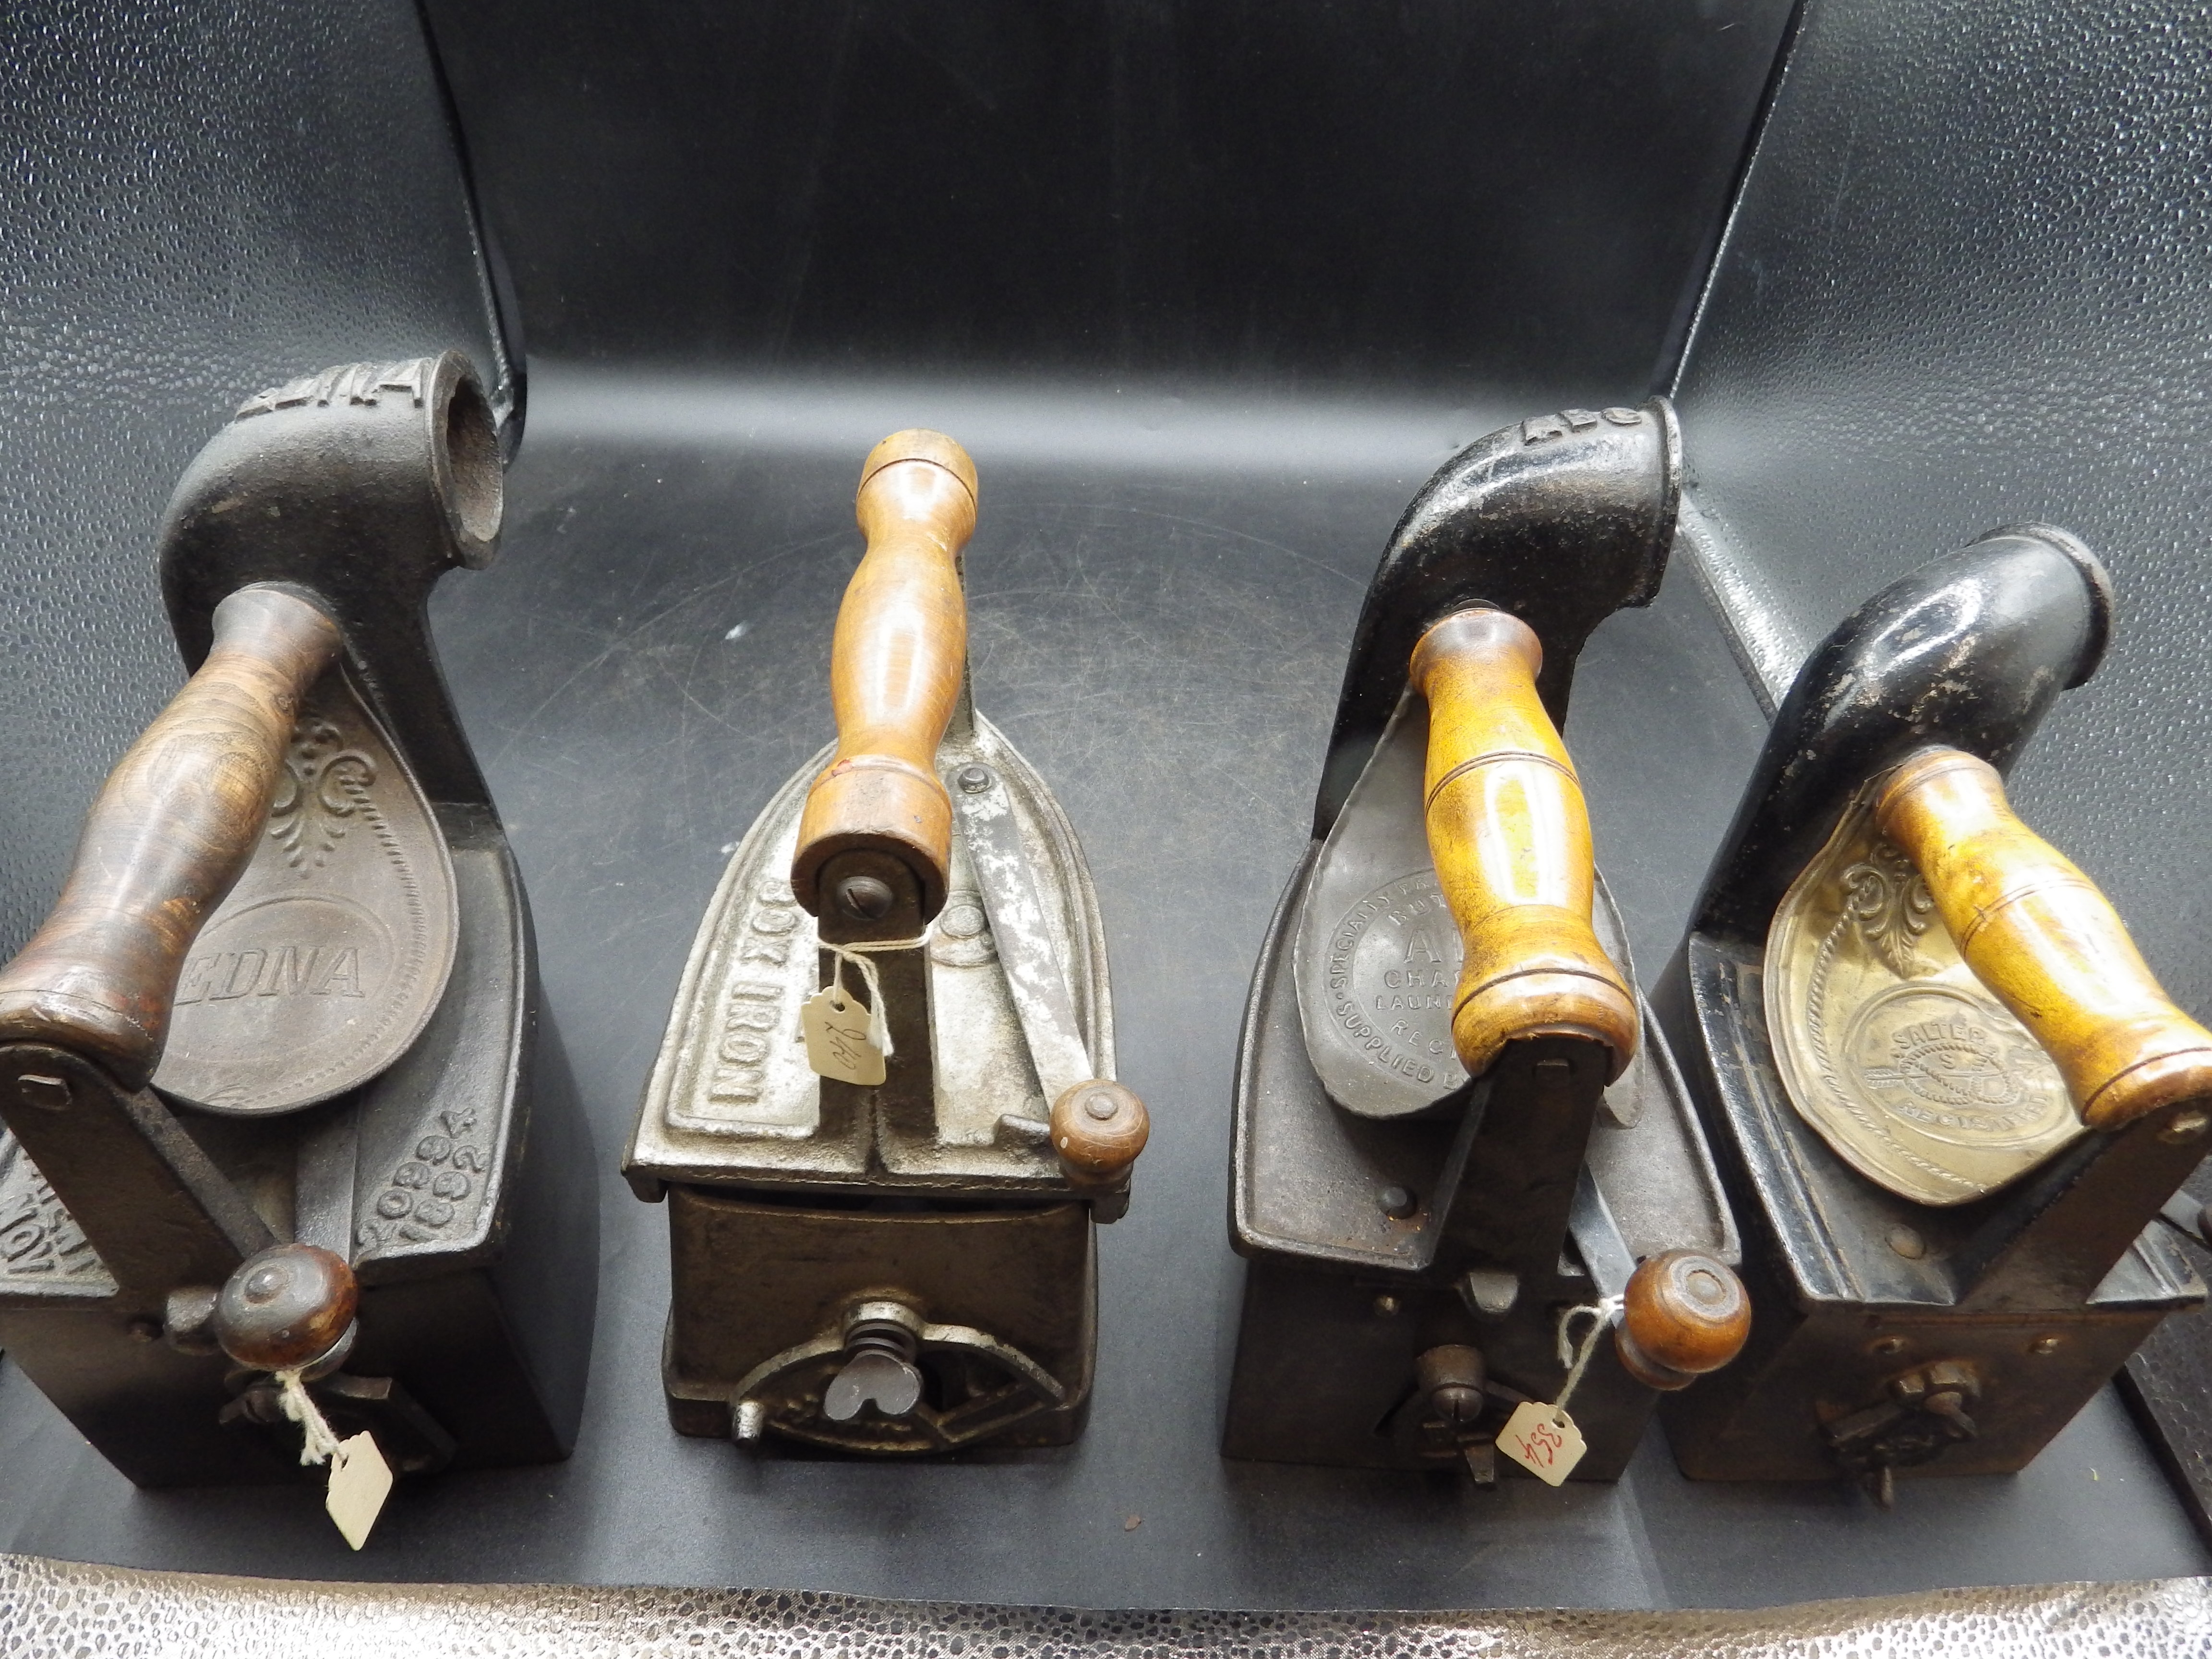 4 charcoal box irons with heat shields to incl Edna, Butlers ABC laundry iron, Salter and an - Image 6 of 6